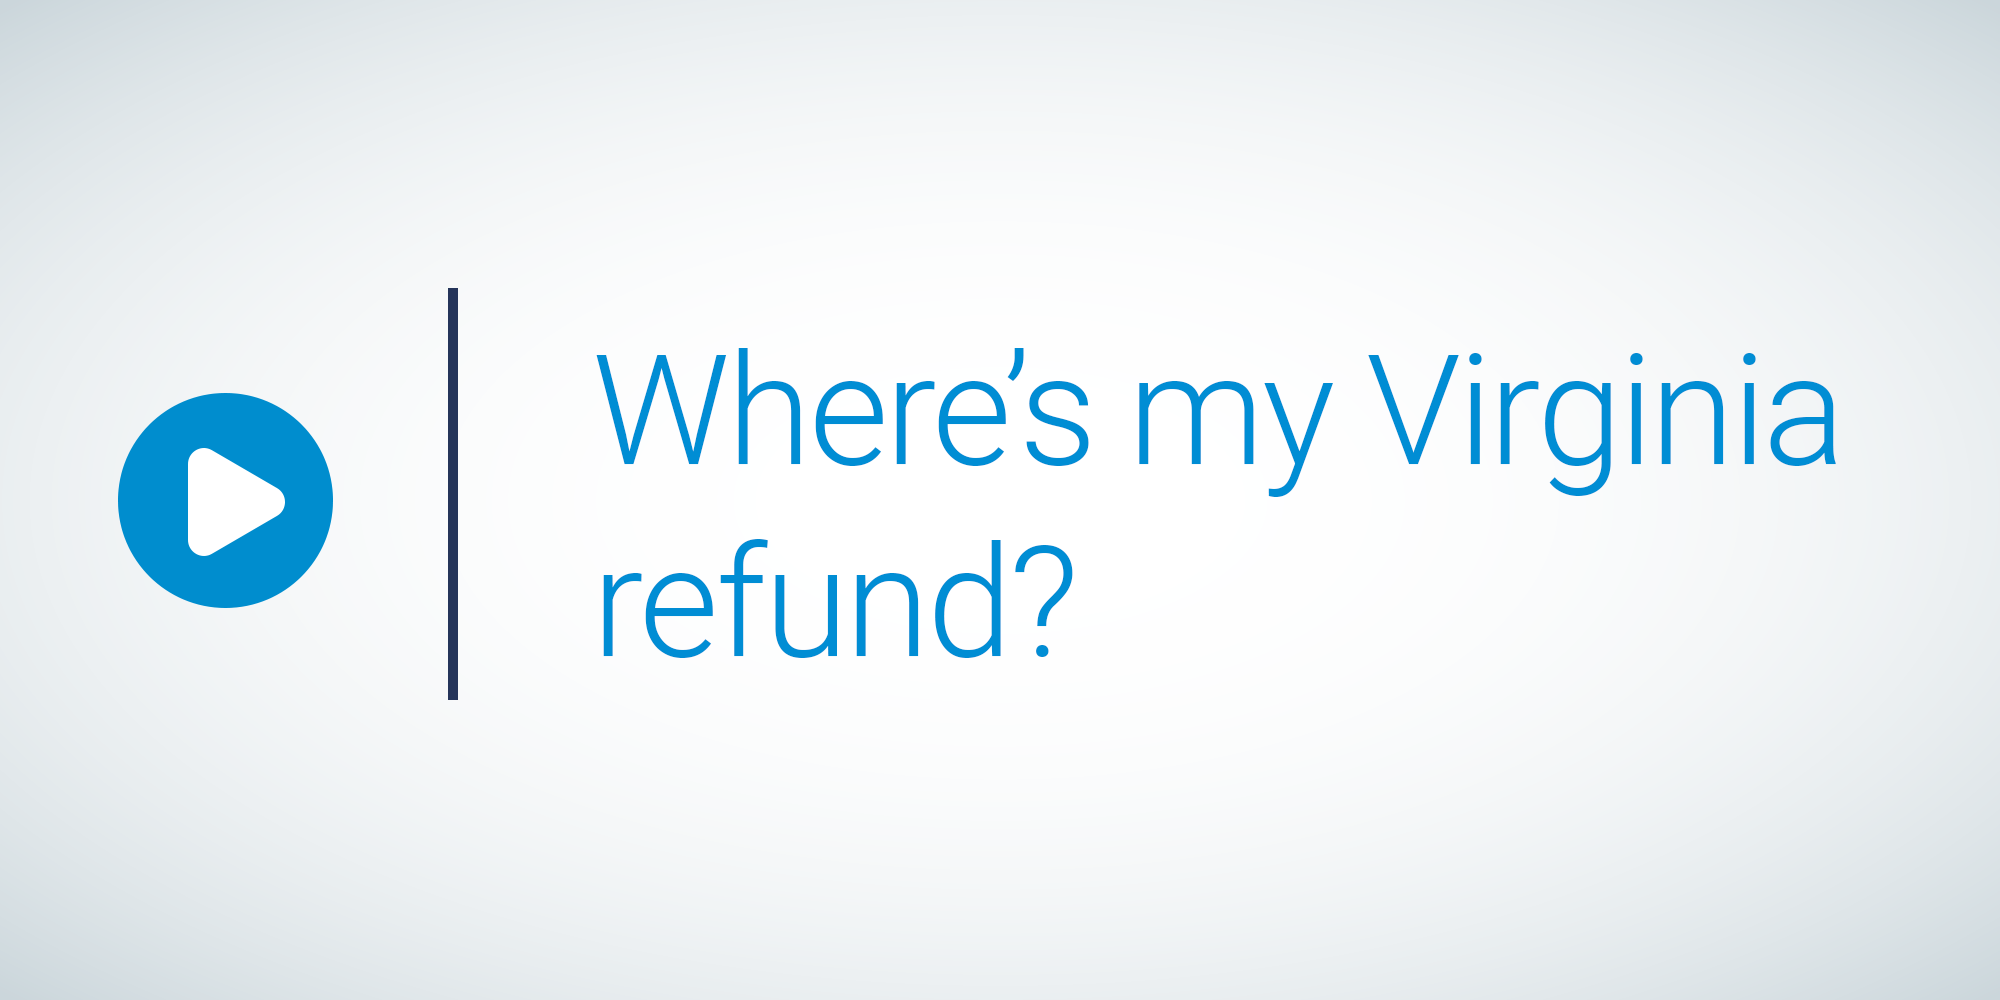 image with text: Where's my Virginia refund?